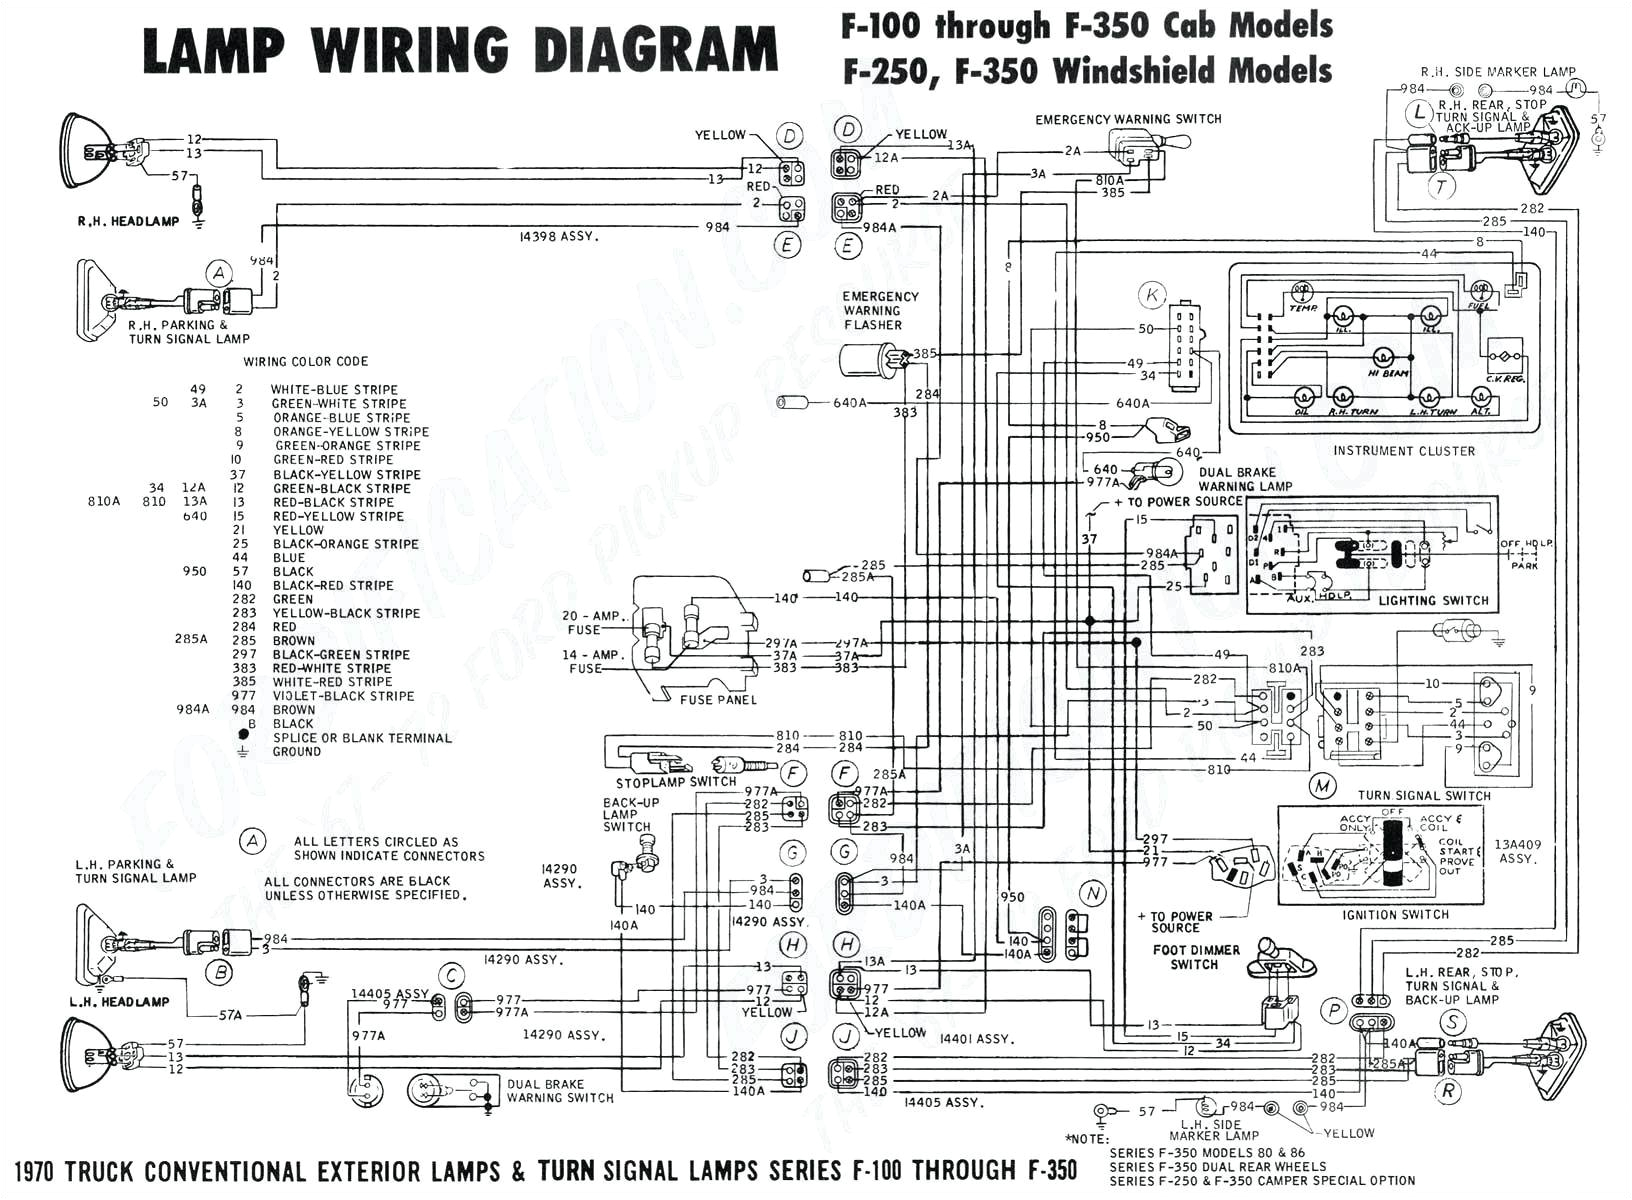 1991 ford ranger wiring harness wiring diagram article review mix 1991 ford ranger wiring harness wiring